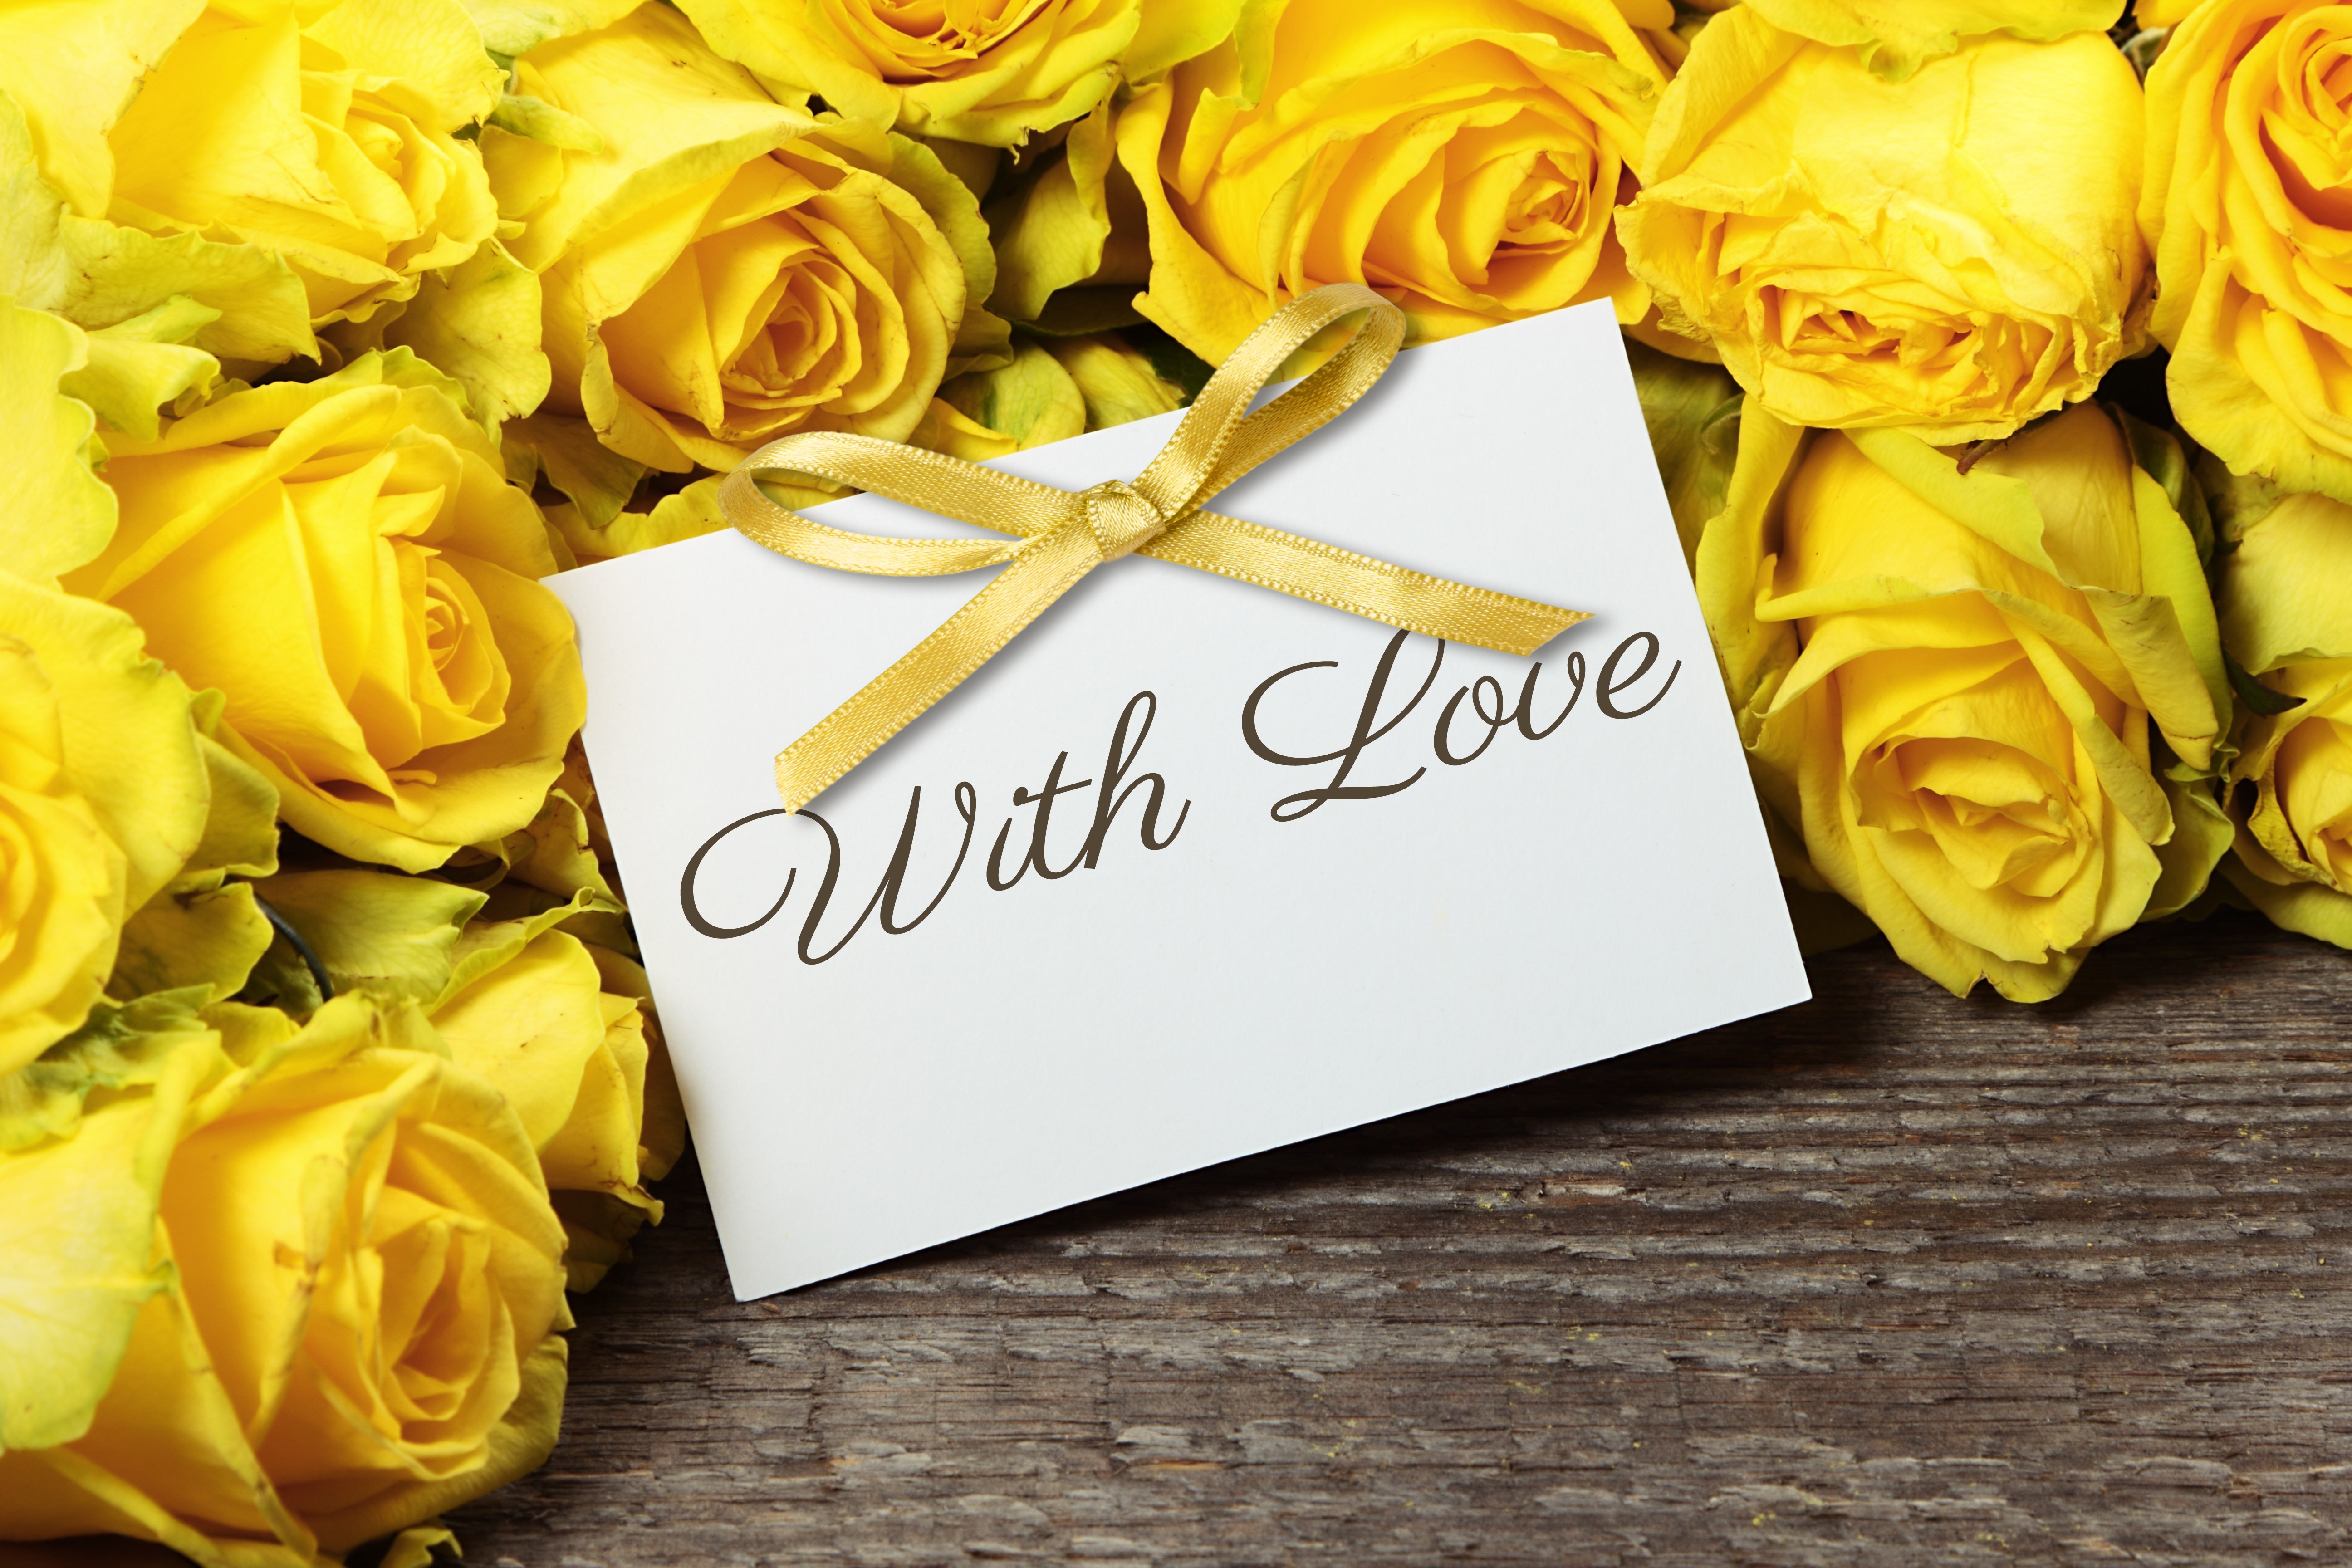 4K, 5K, with love romantic, Roses, Yellow Gallery HD Wallpaper